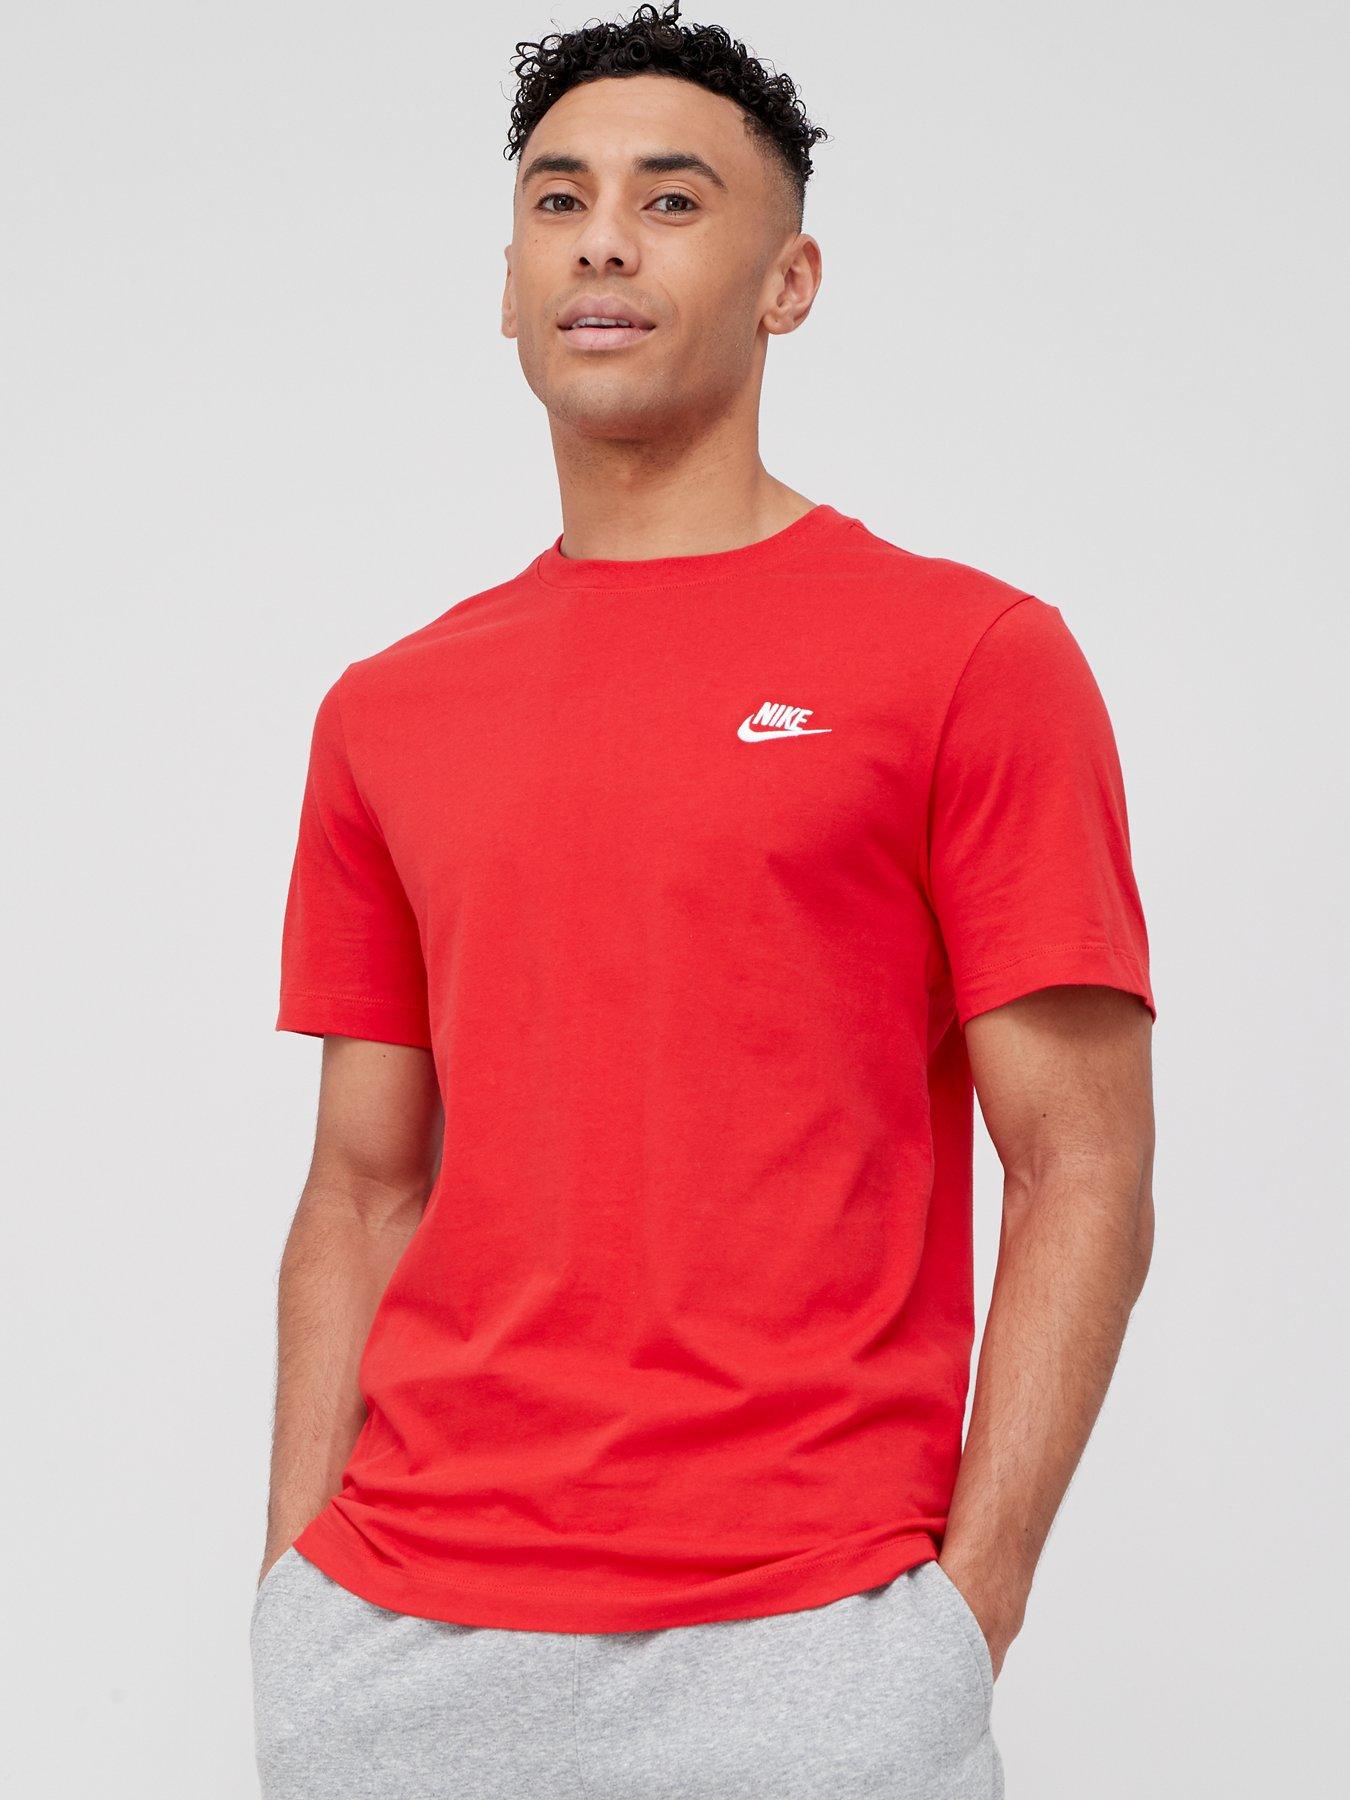 Nike in London, Men's T-Shirts for Sale